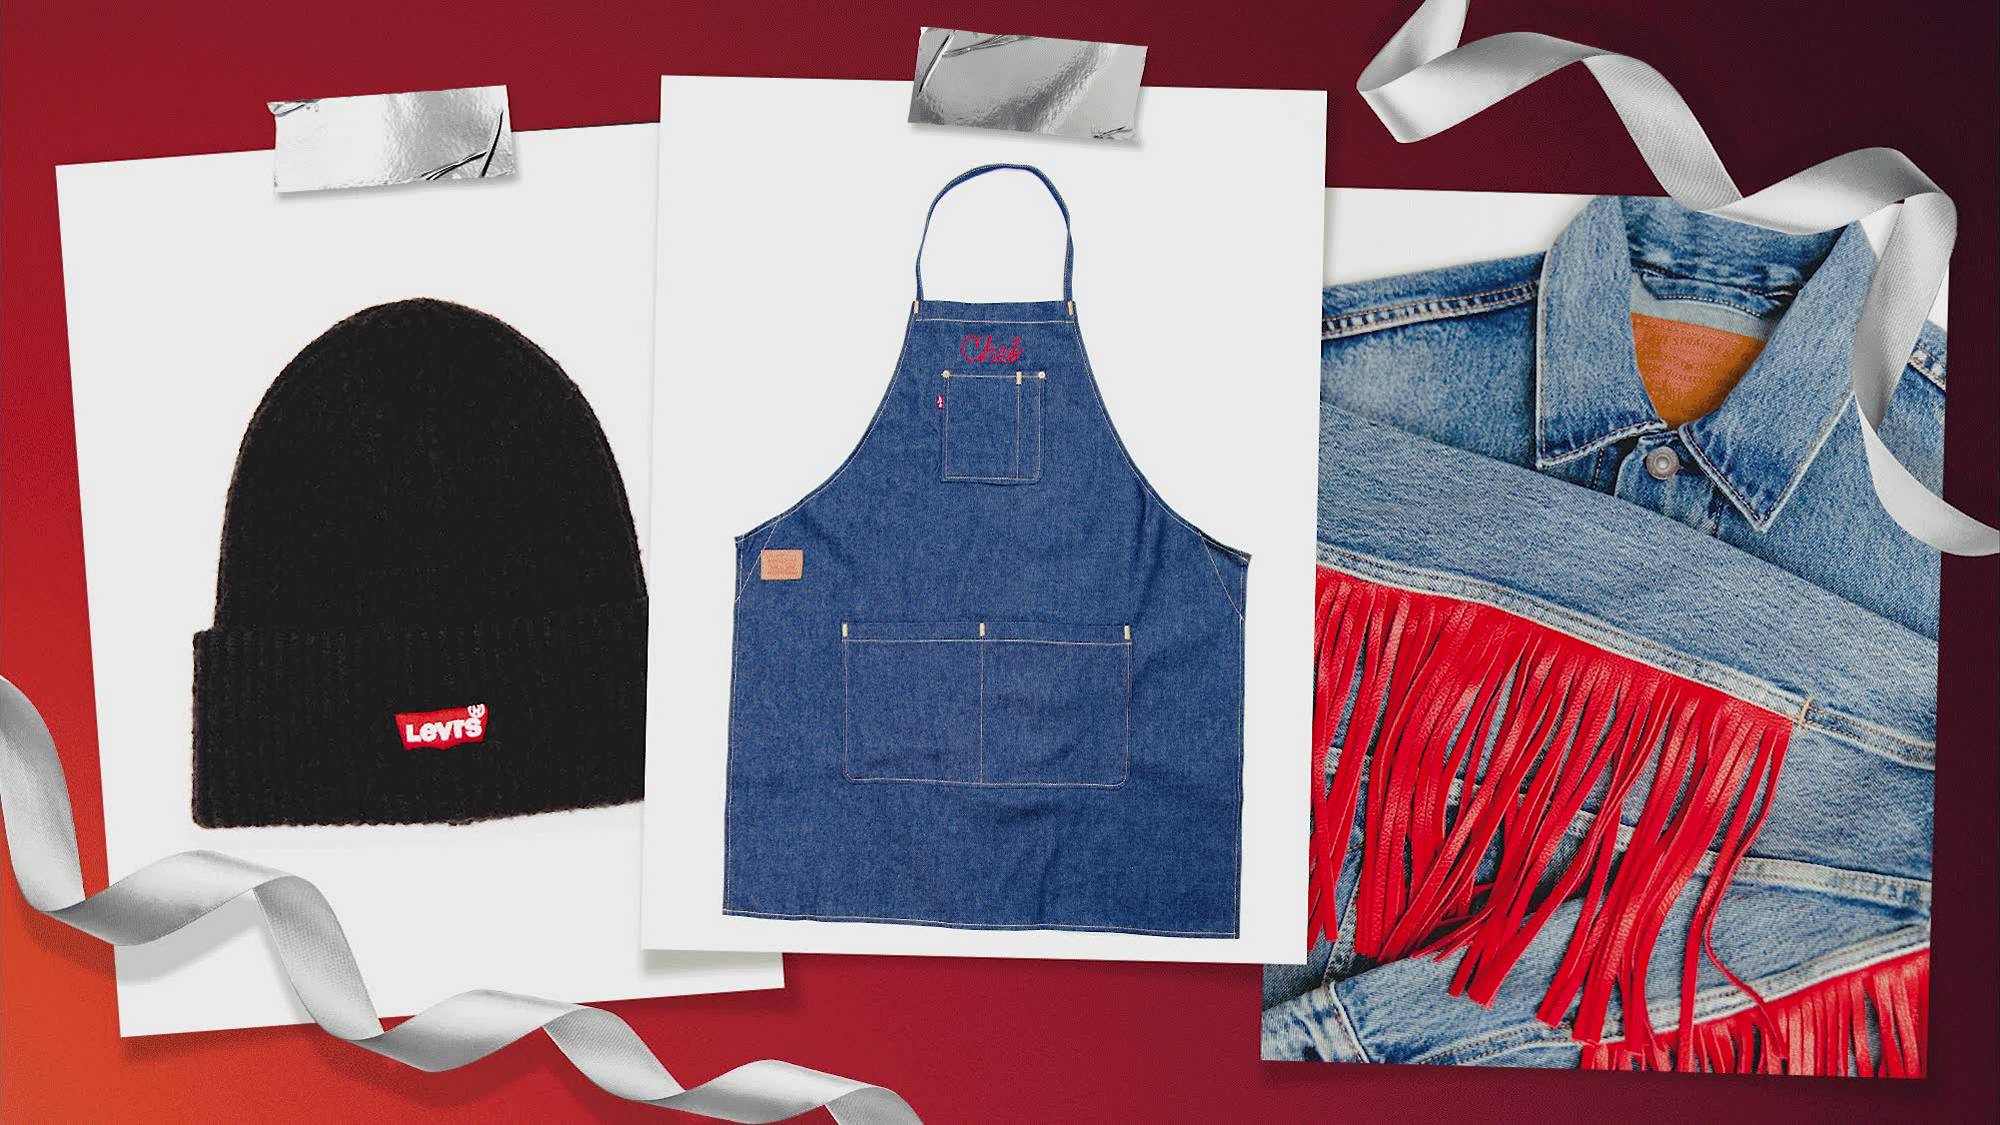 Image of products from Levi's Tailor Shop.